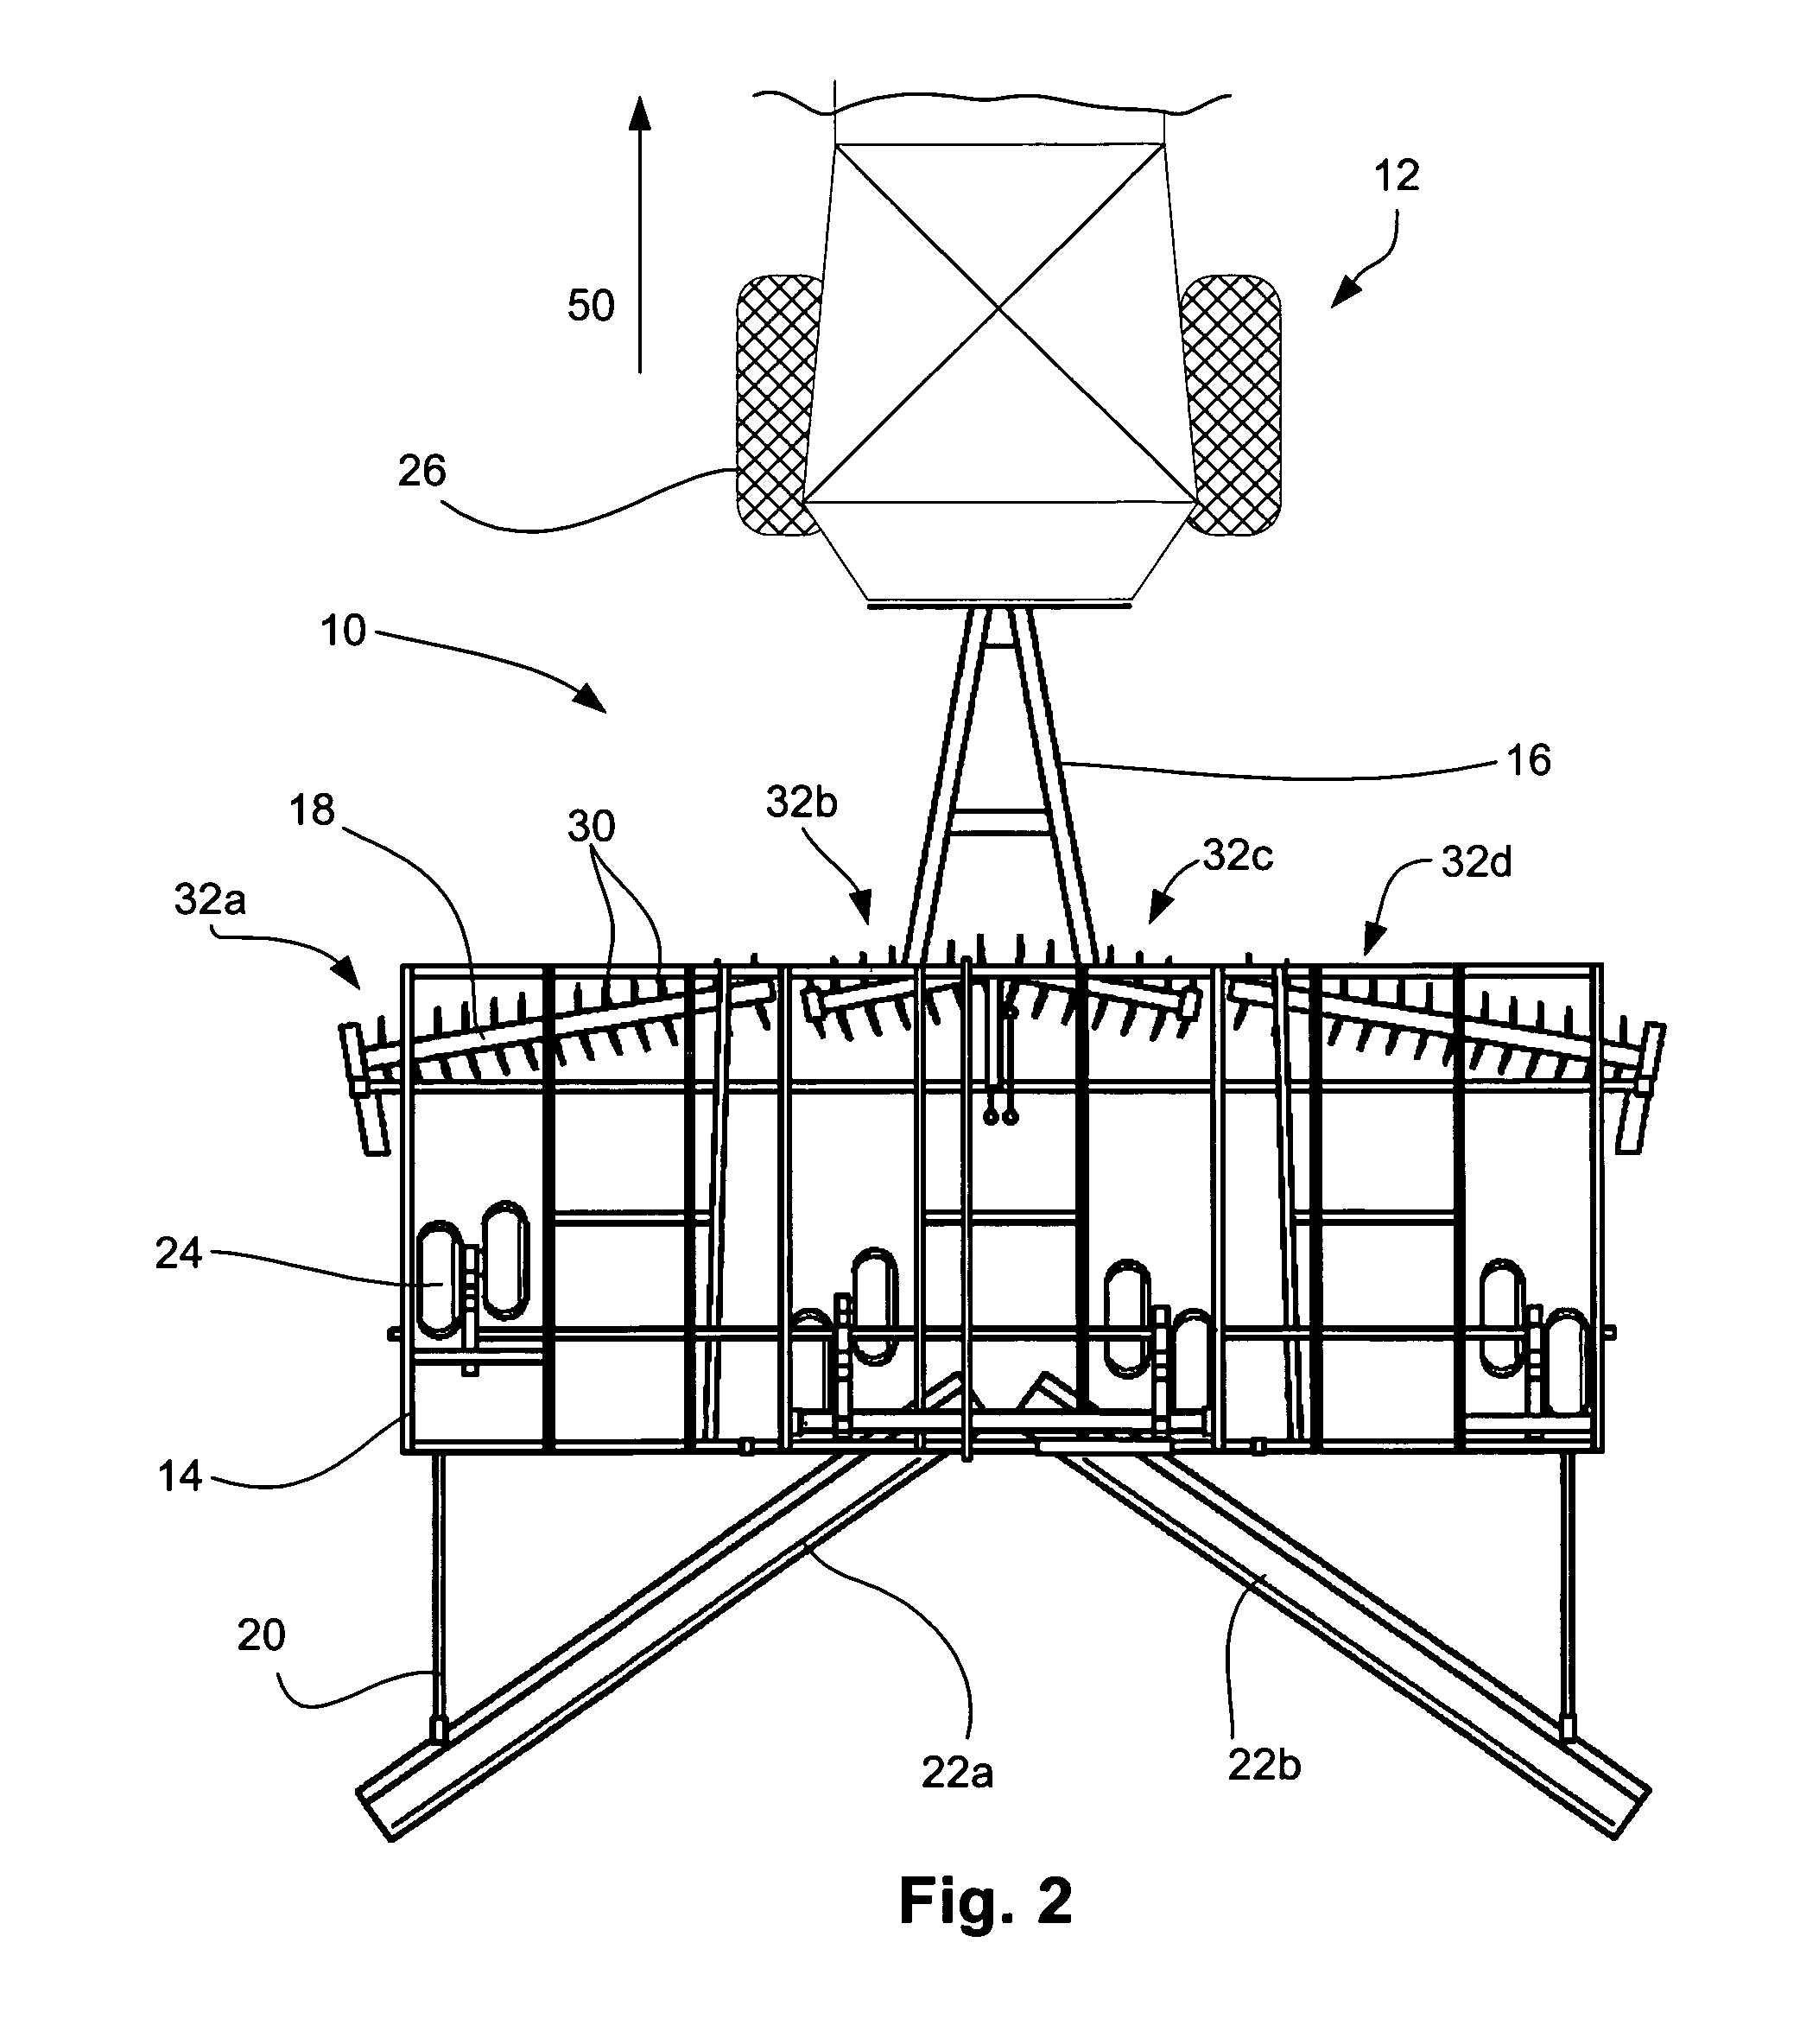 Seedbed conditioning vertical tillage apparatus